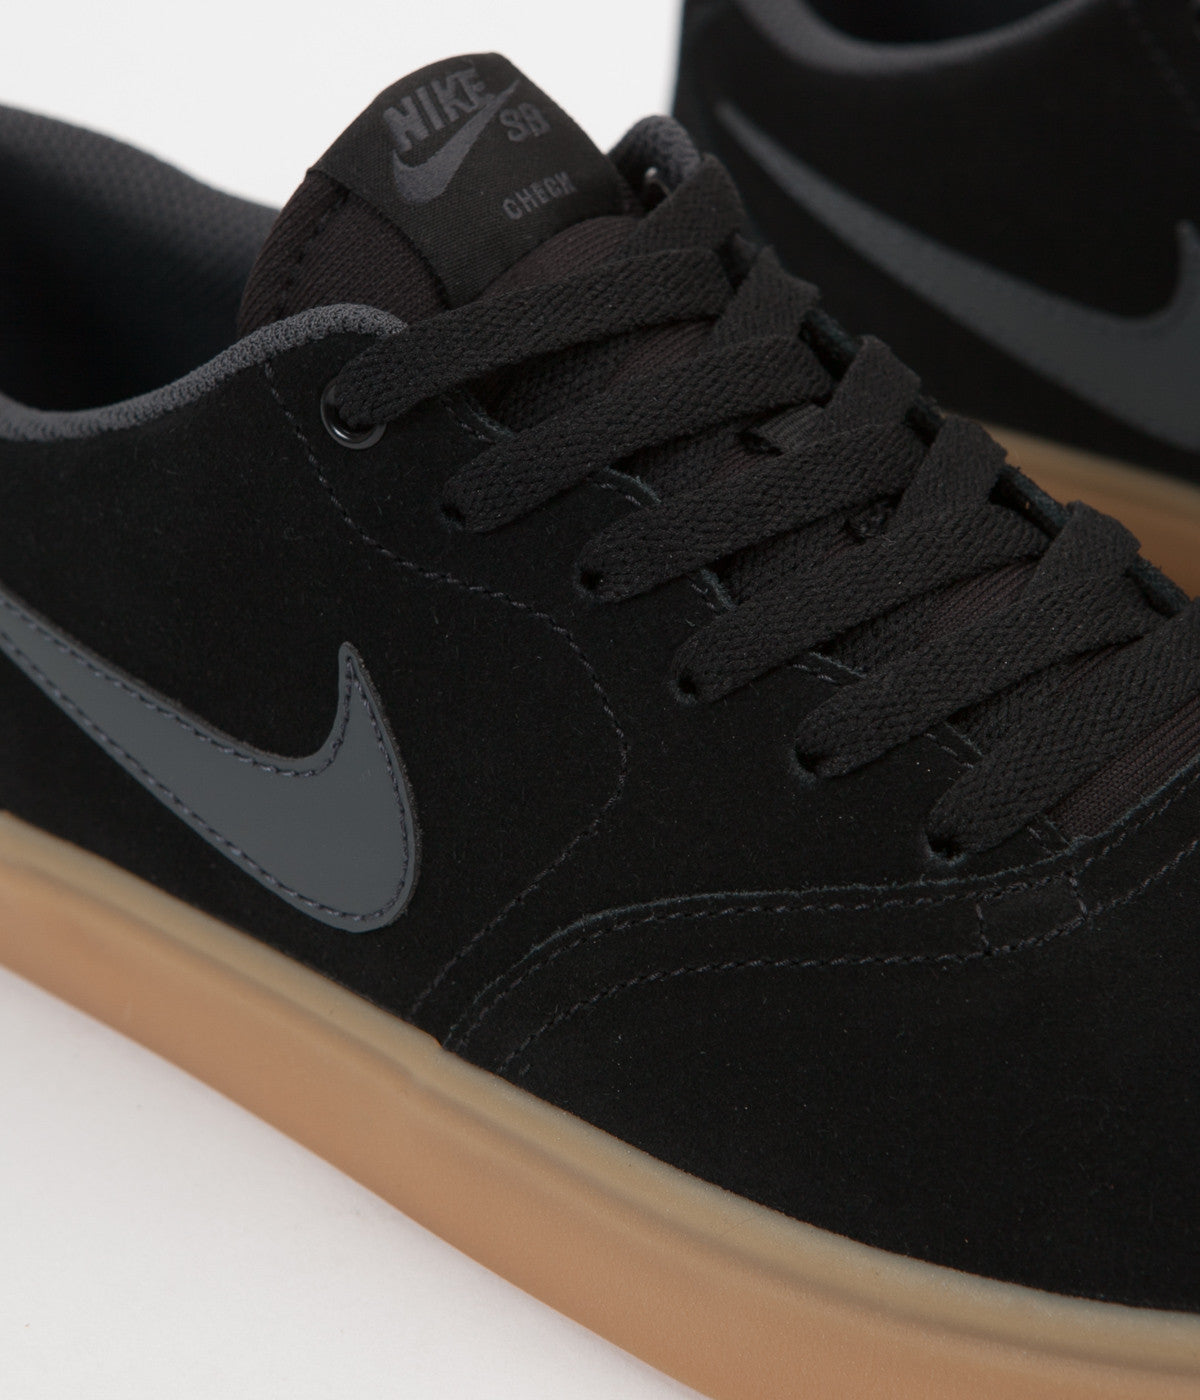 black nike shoes with brown soles